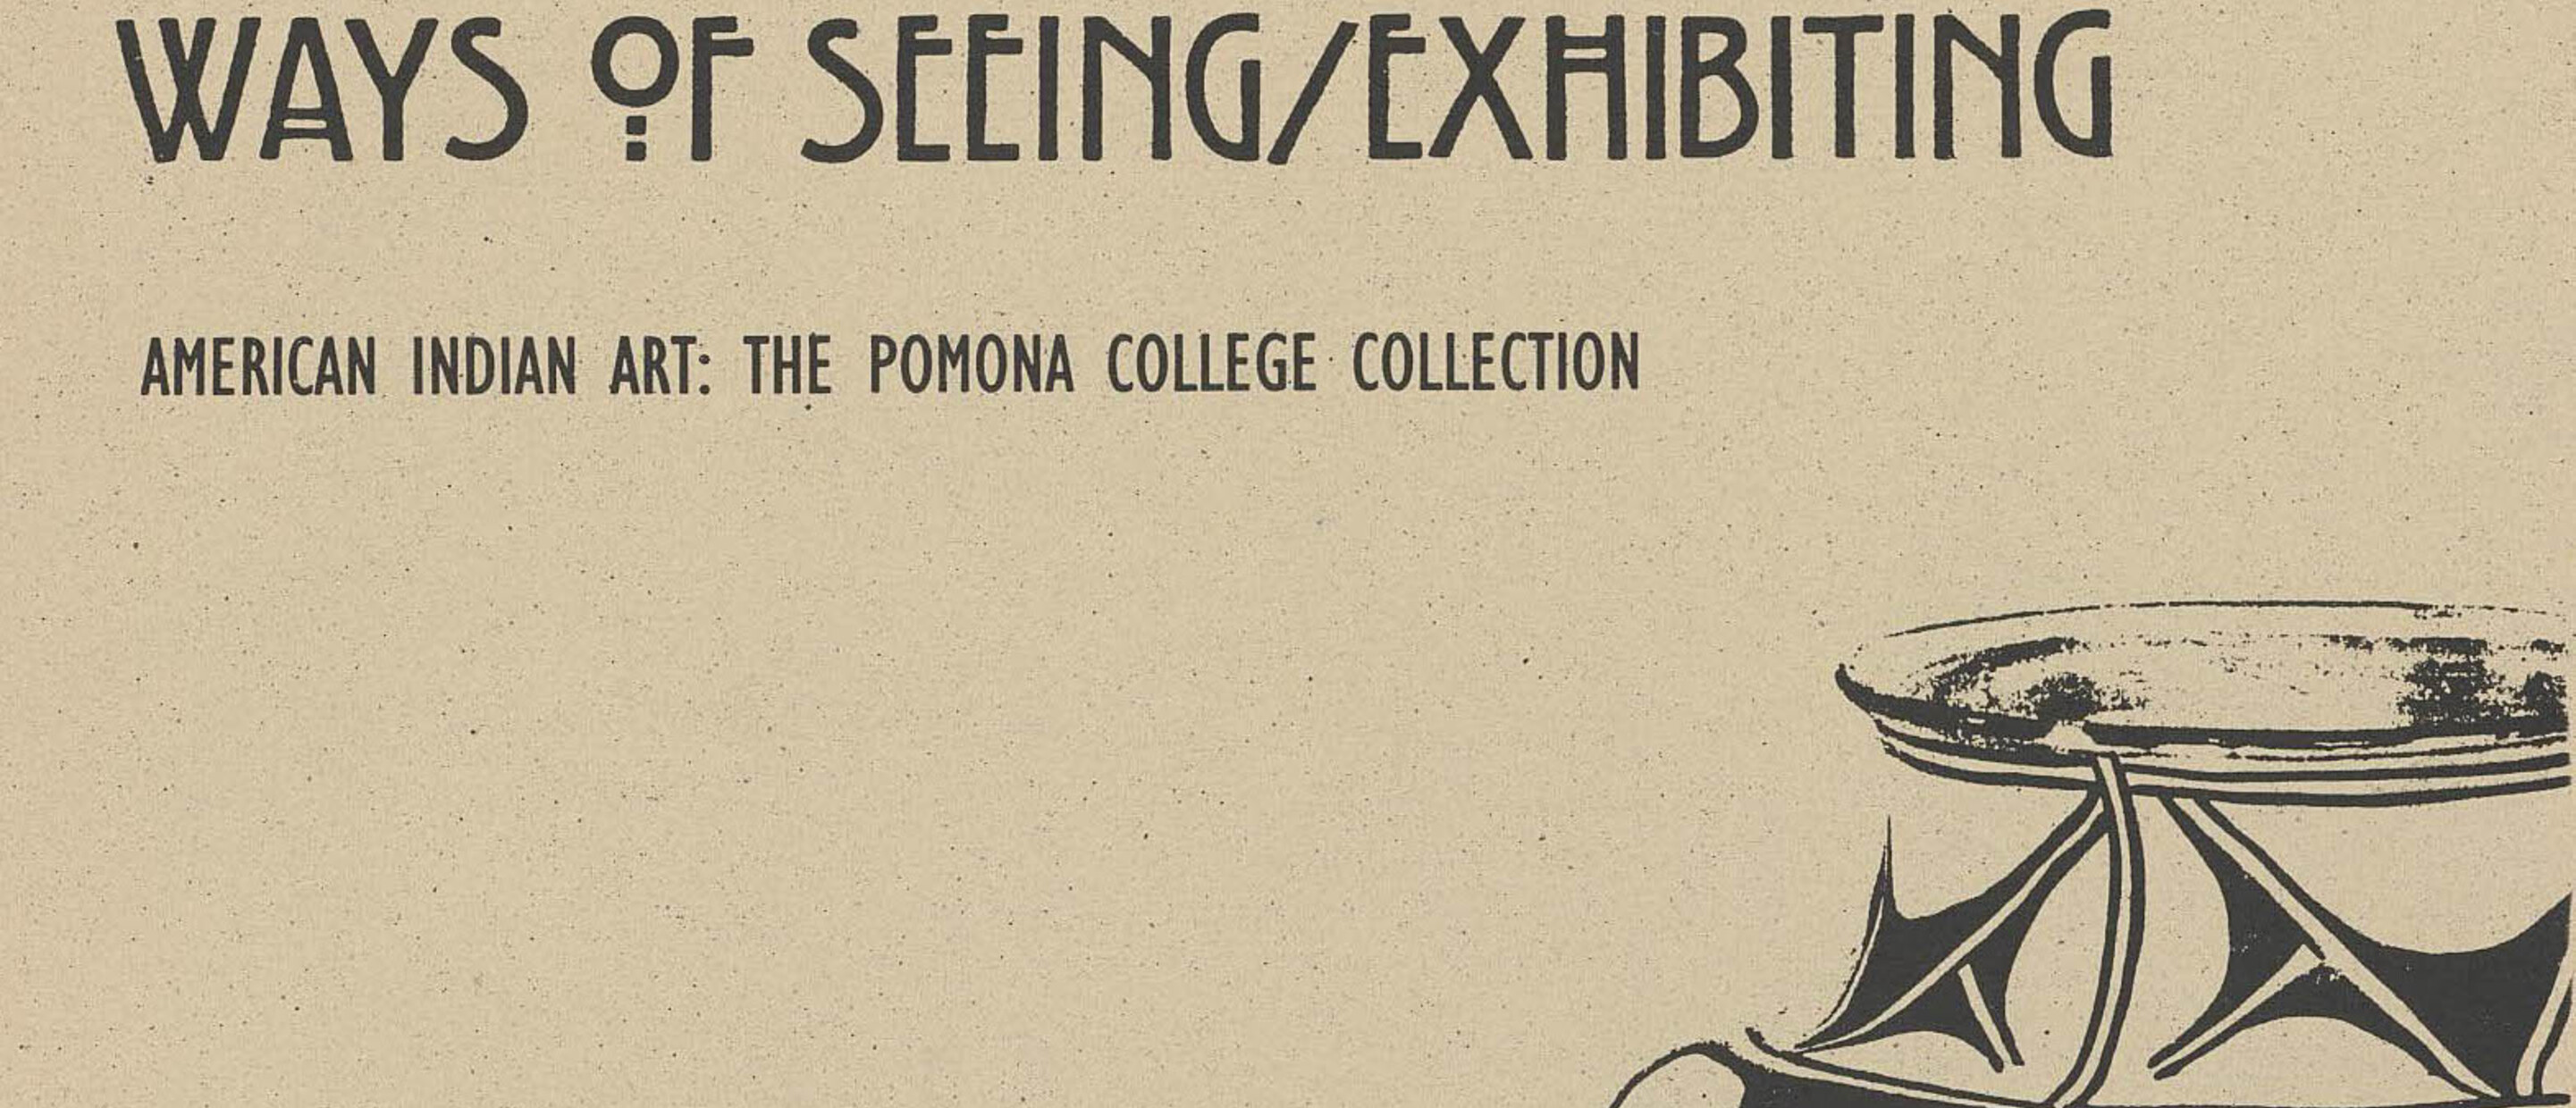 front cover of exhibition catalogue with the the title "Ways of Seeing/Exhibiting"